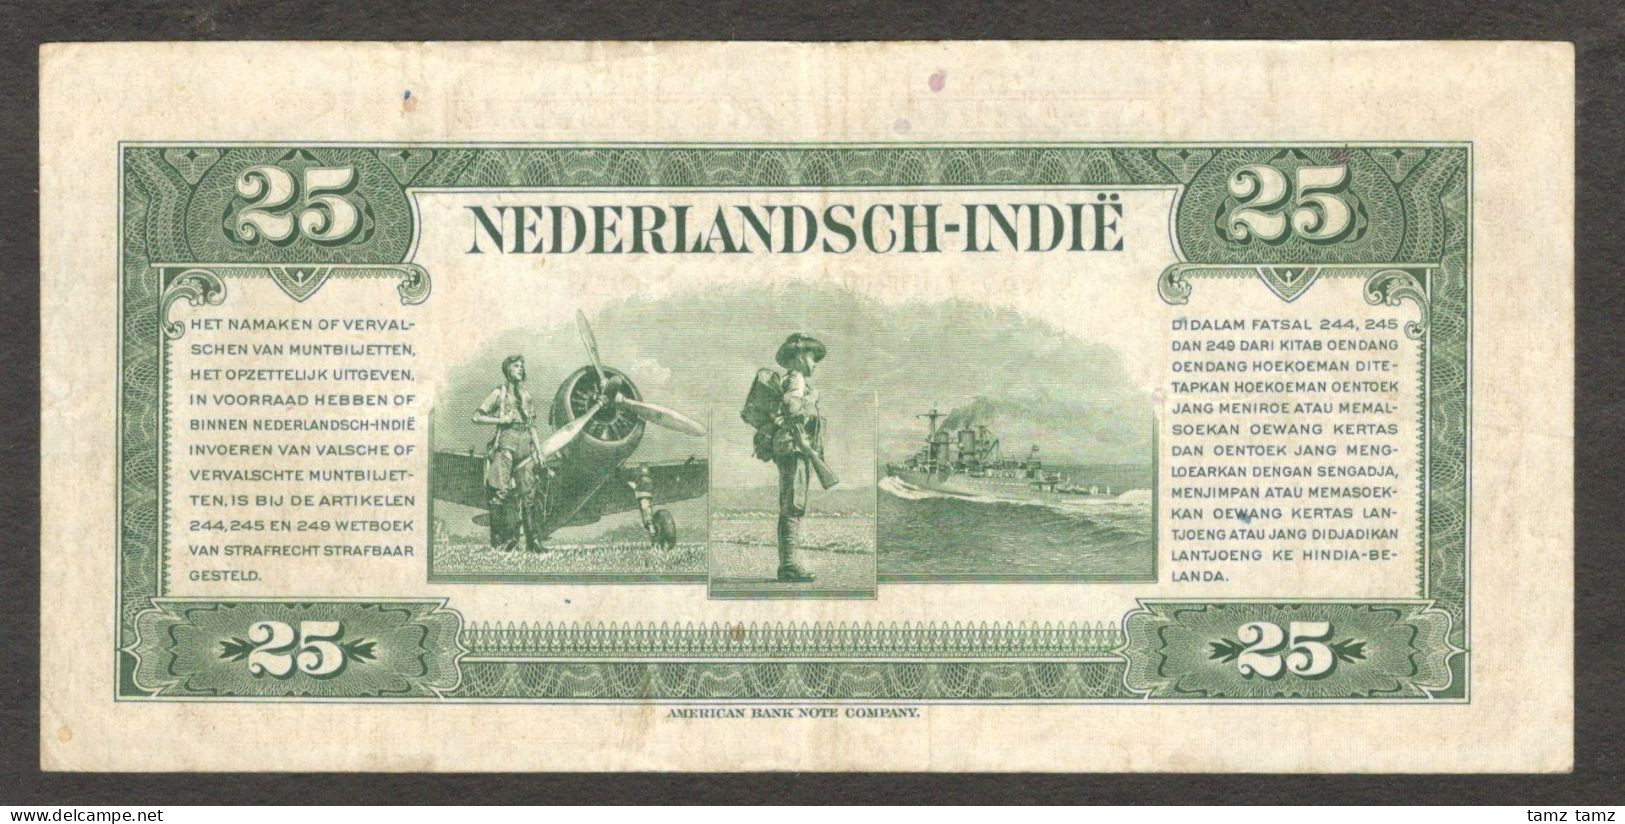 Netherlands Indies Civil Administration Indonesia NICA 25 Gulden P-115 1943 VF - Indonesia